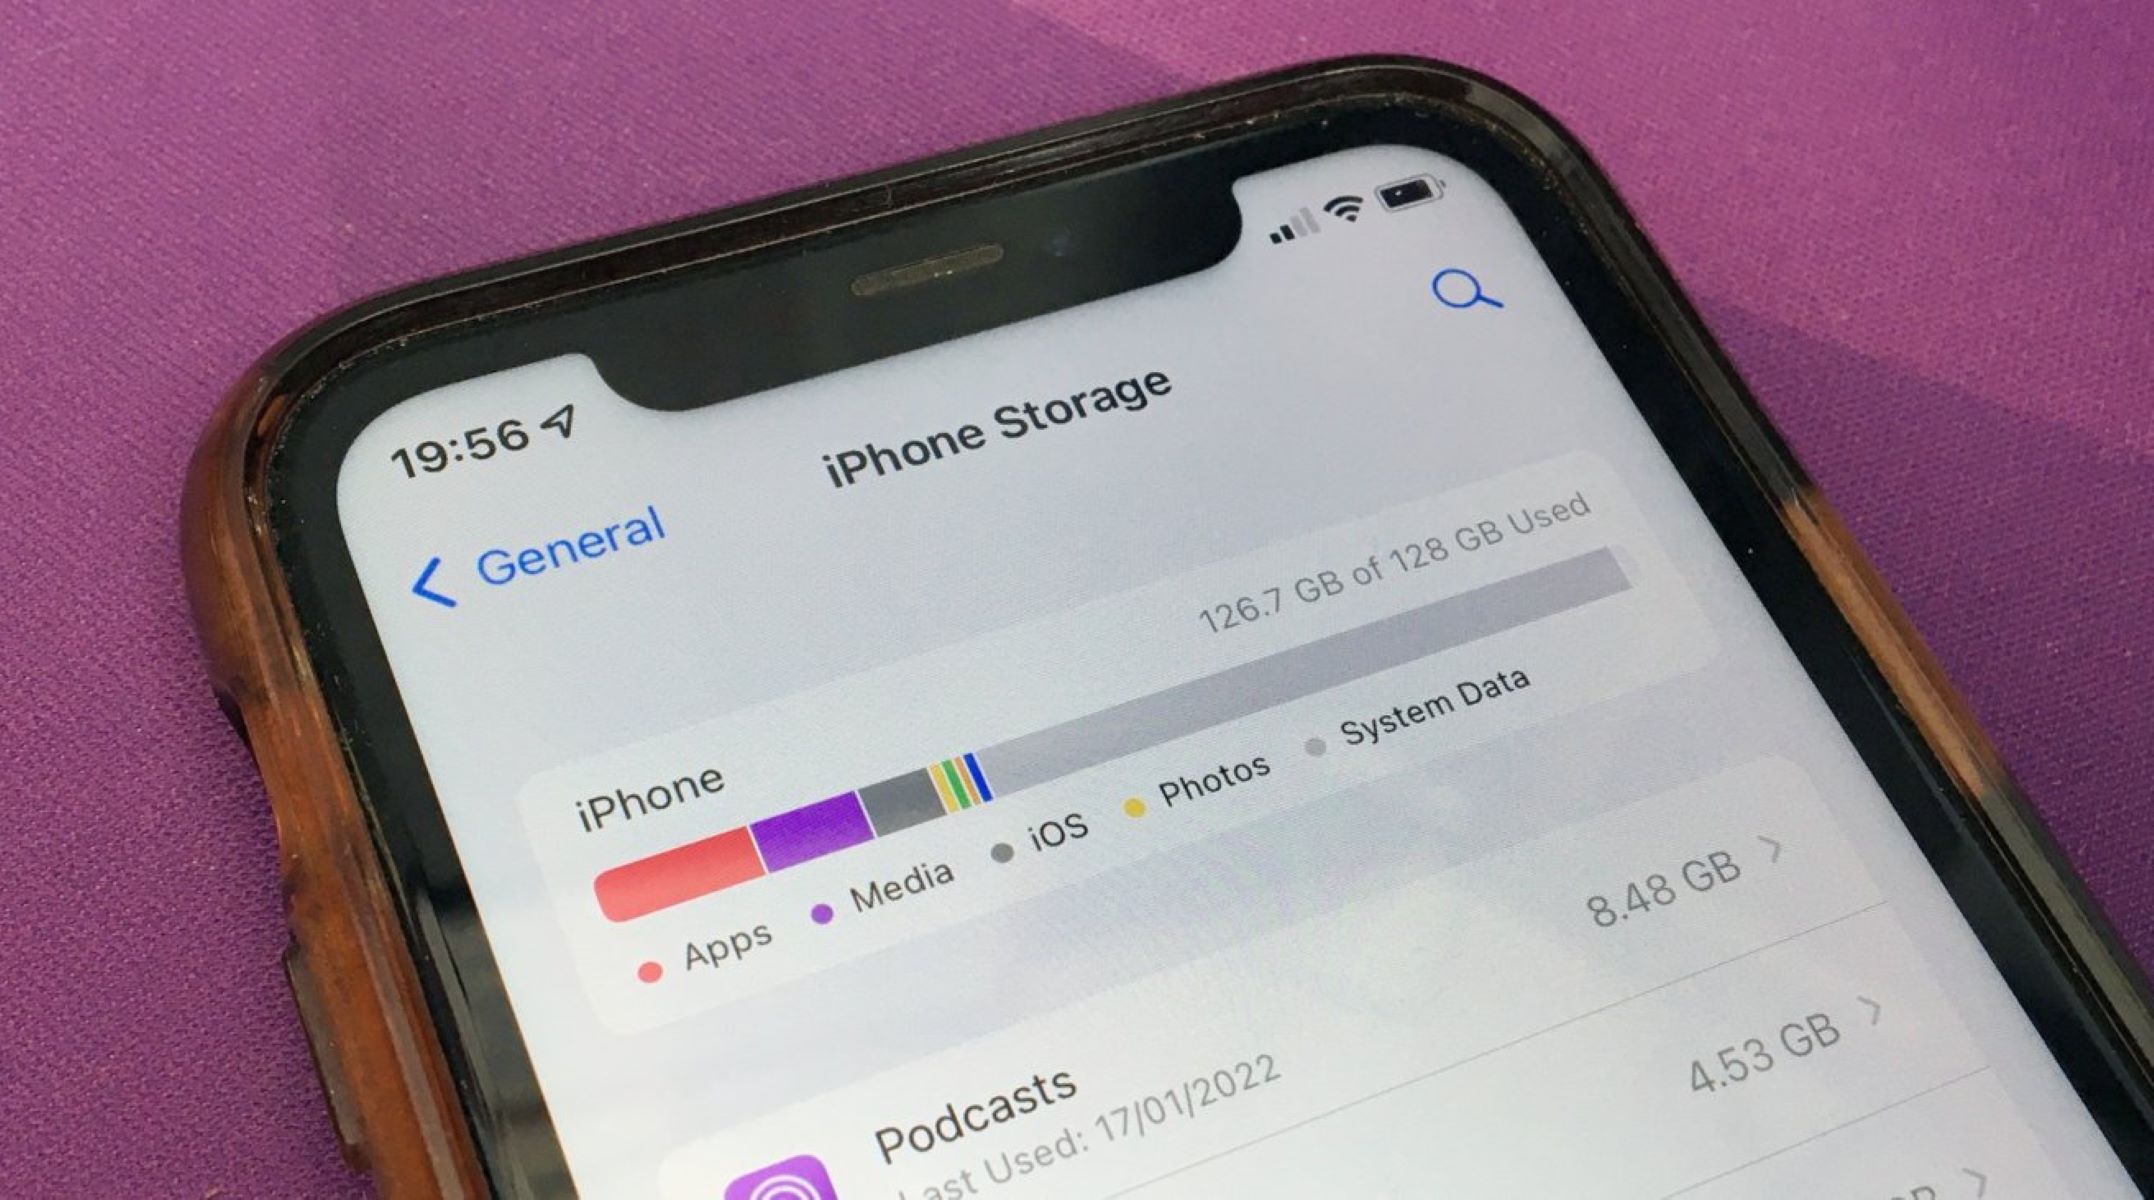 iphone-11-storage-capacity-understanding-the-available-storage-options